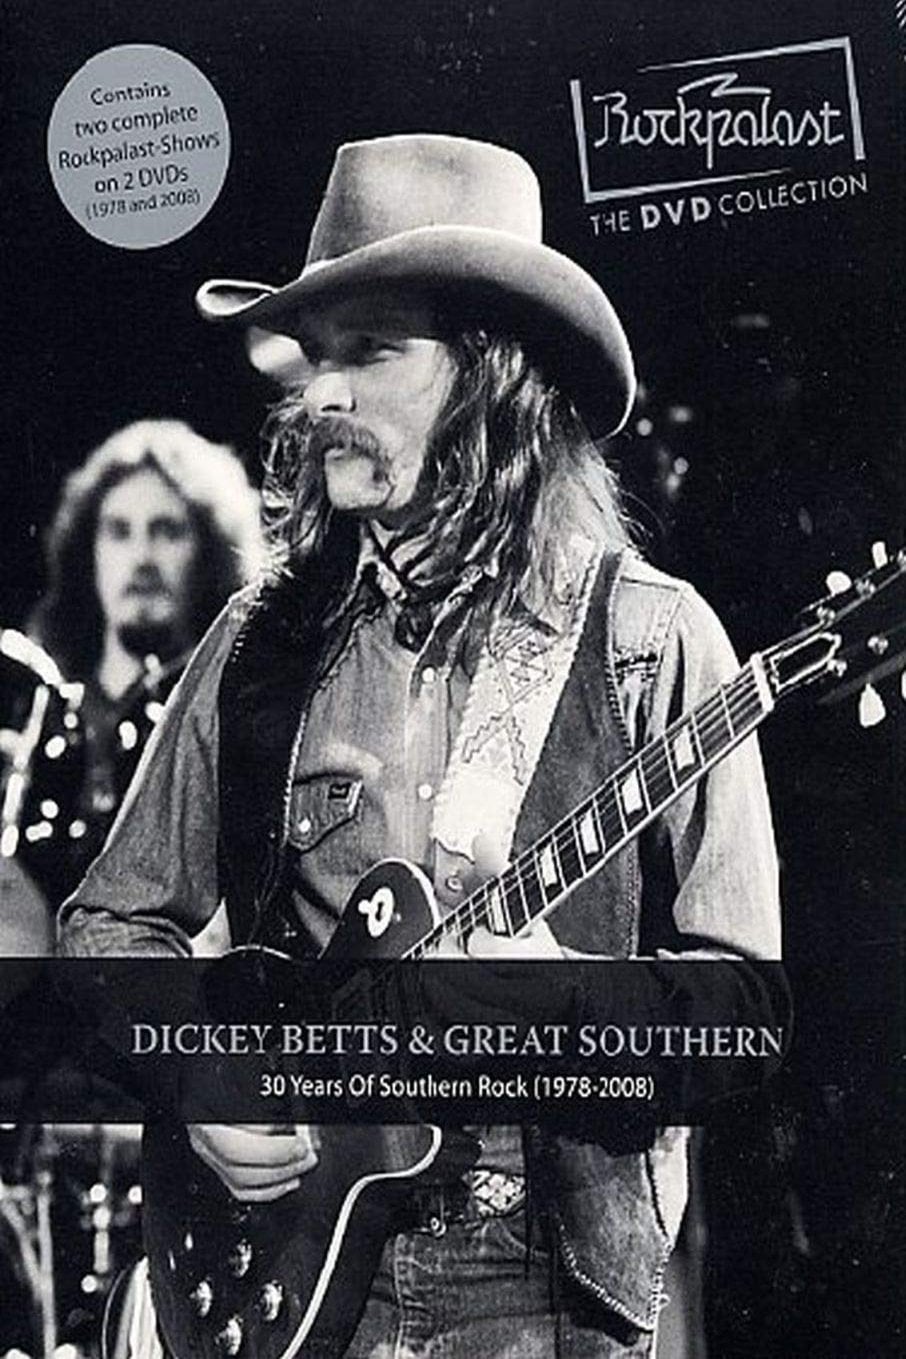 Dickey Betts & Great Southern: Rockpalast